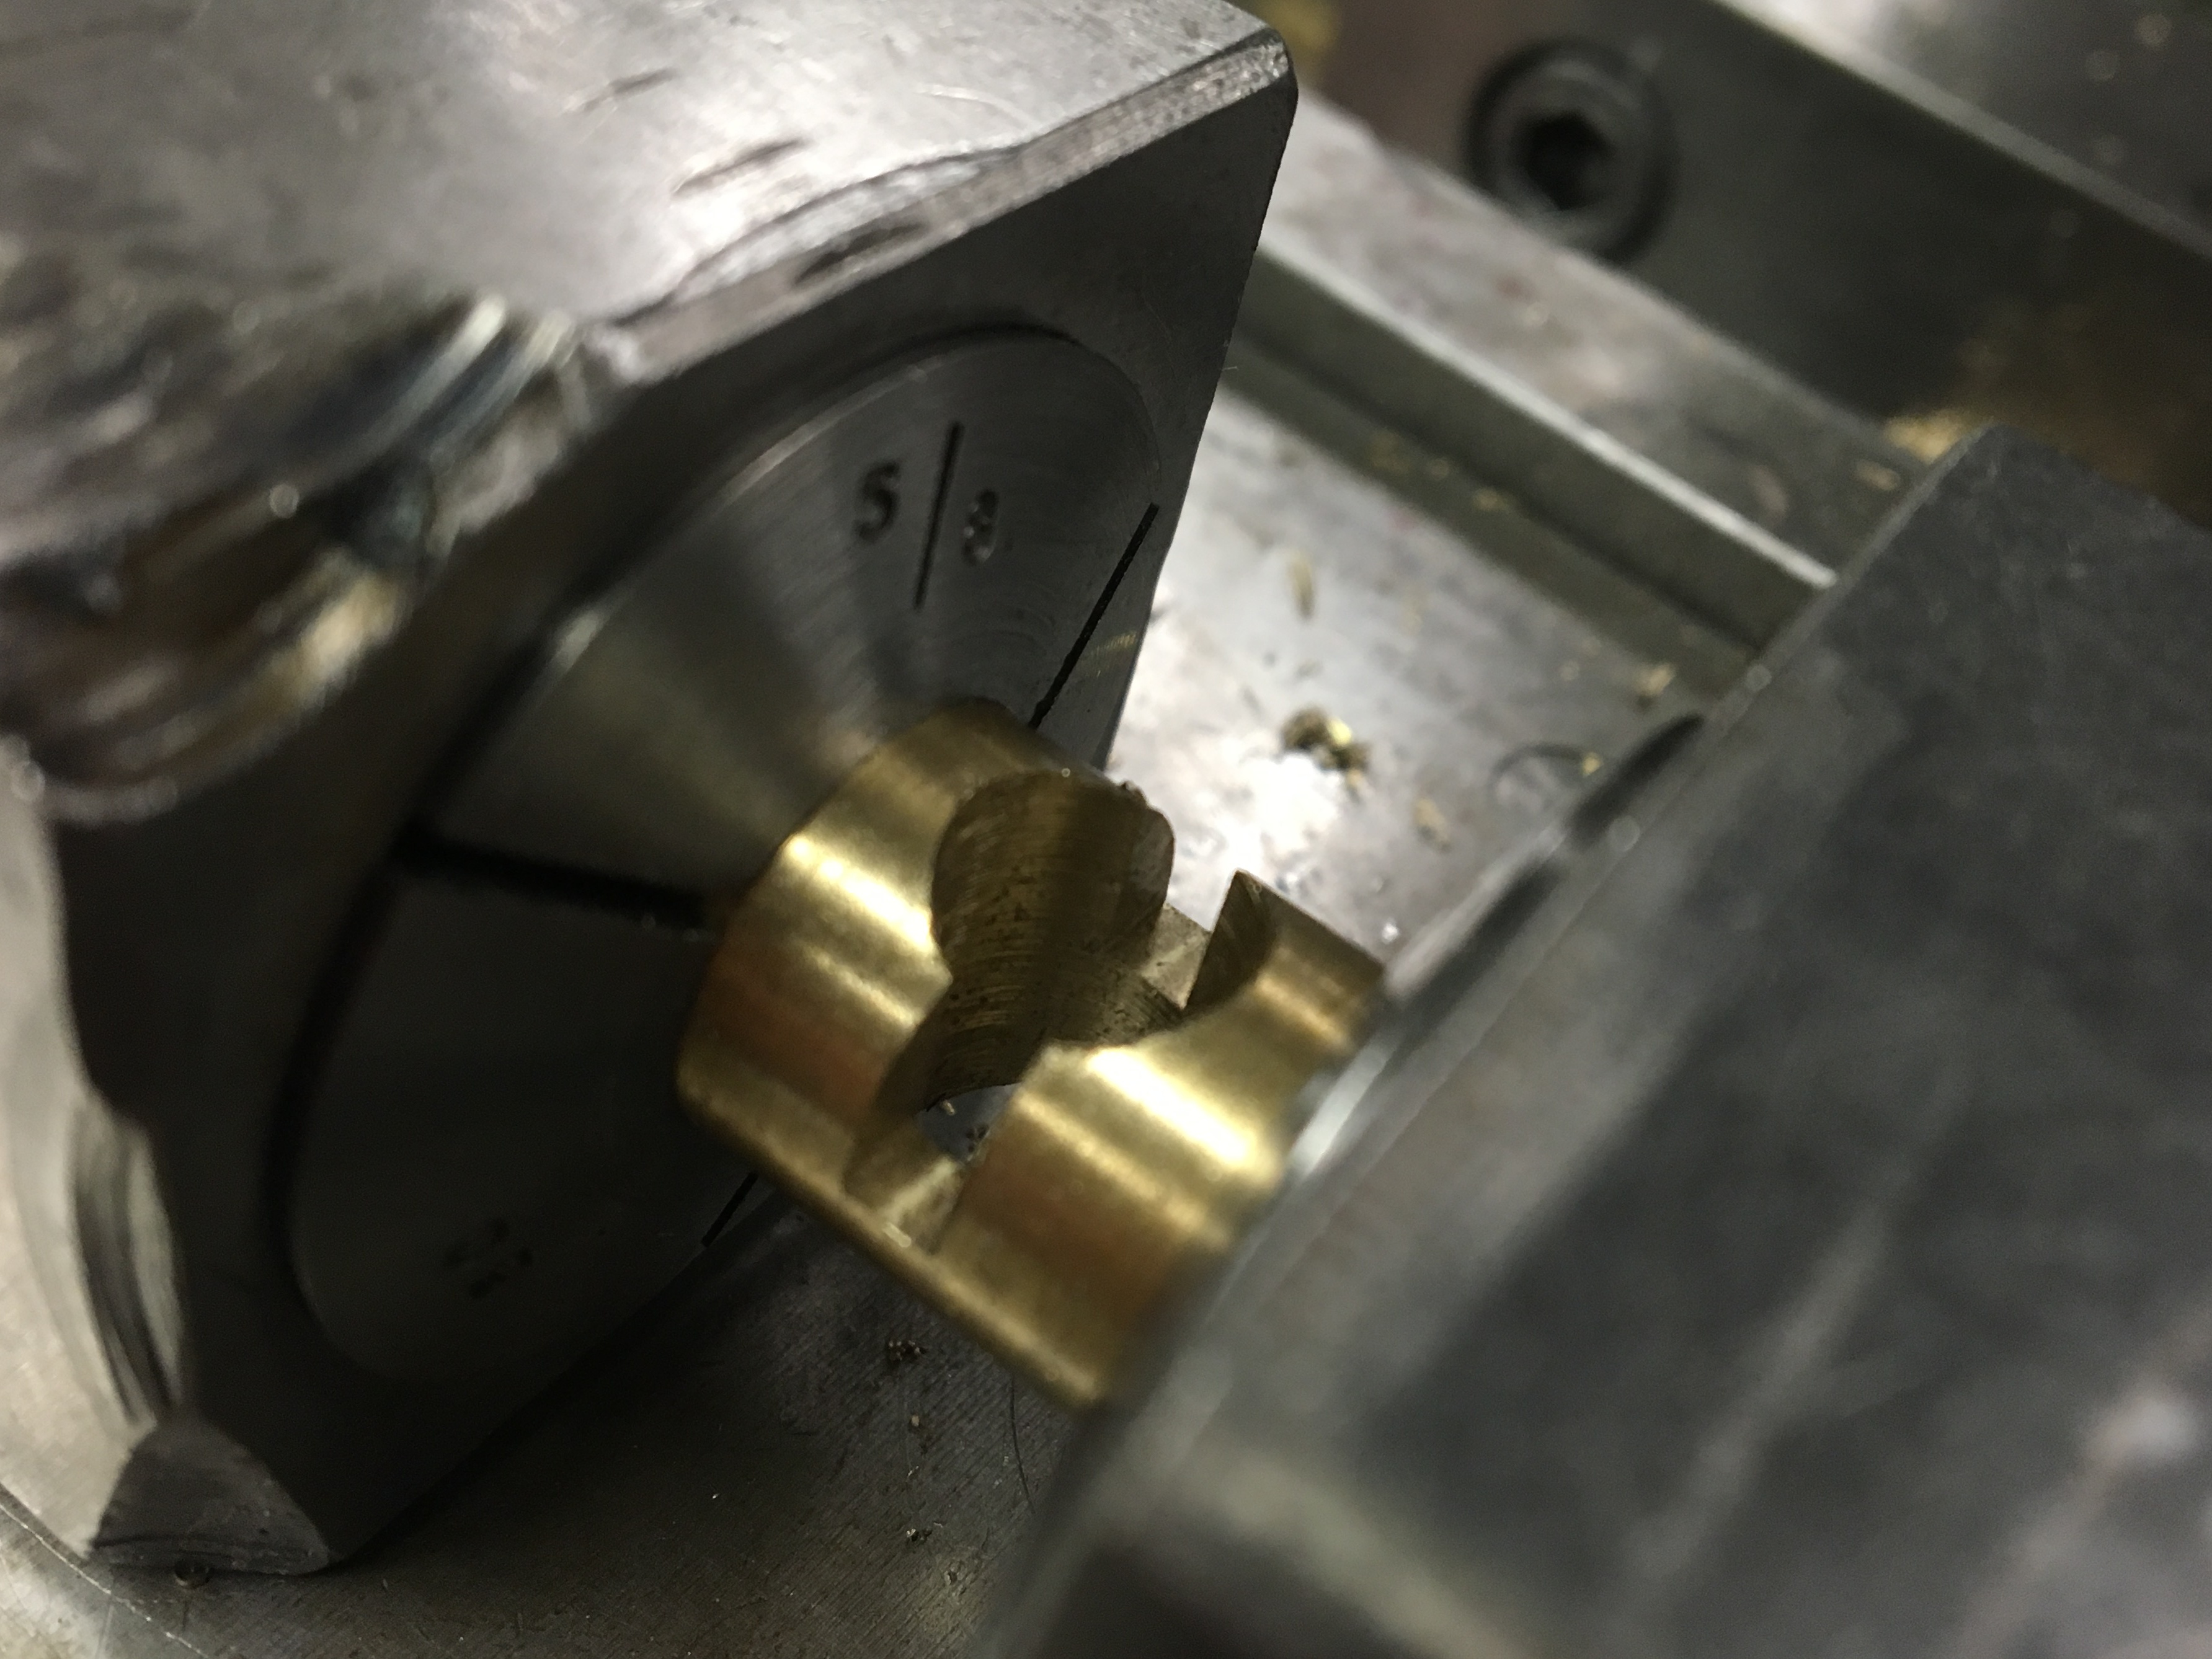 Minimal clearance for drilling axle hole and milling locking slot